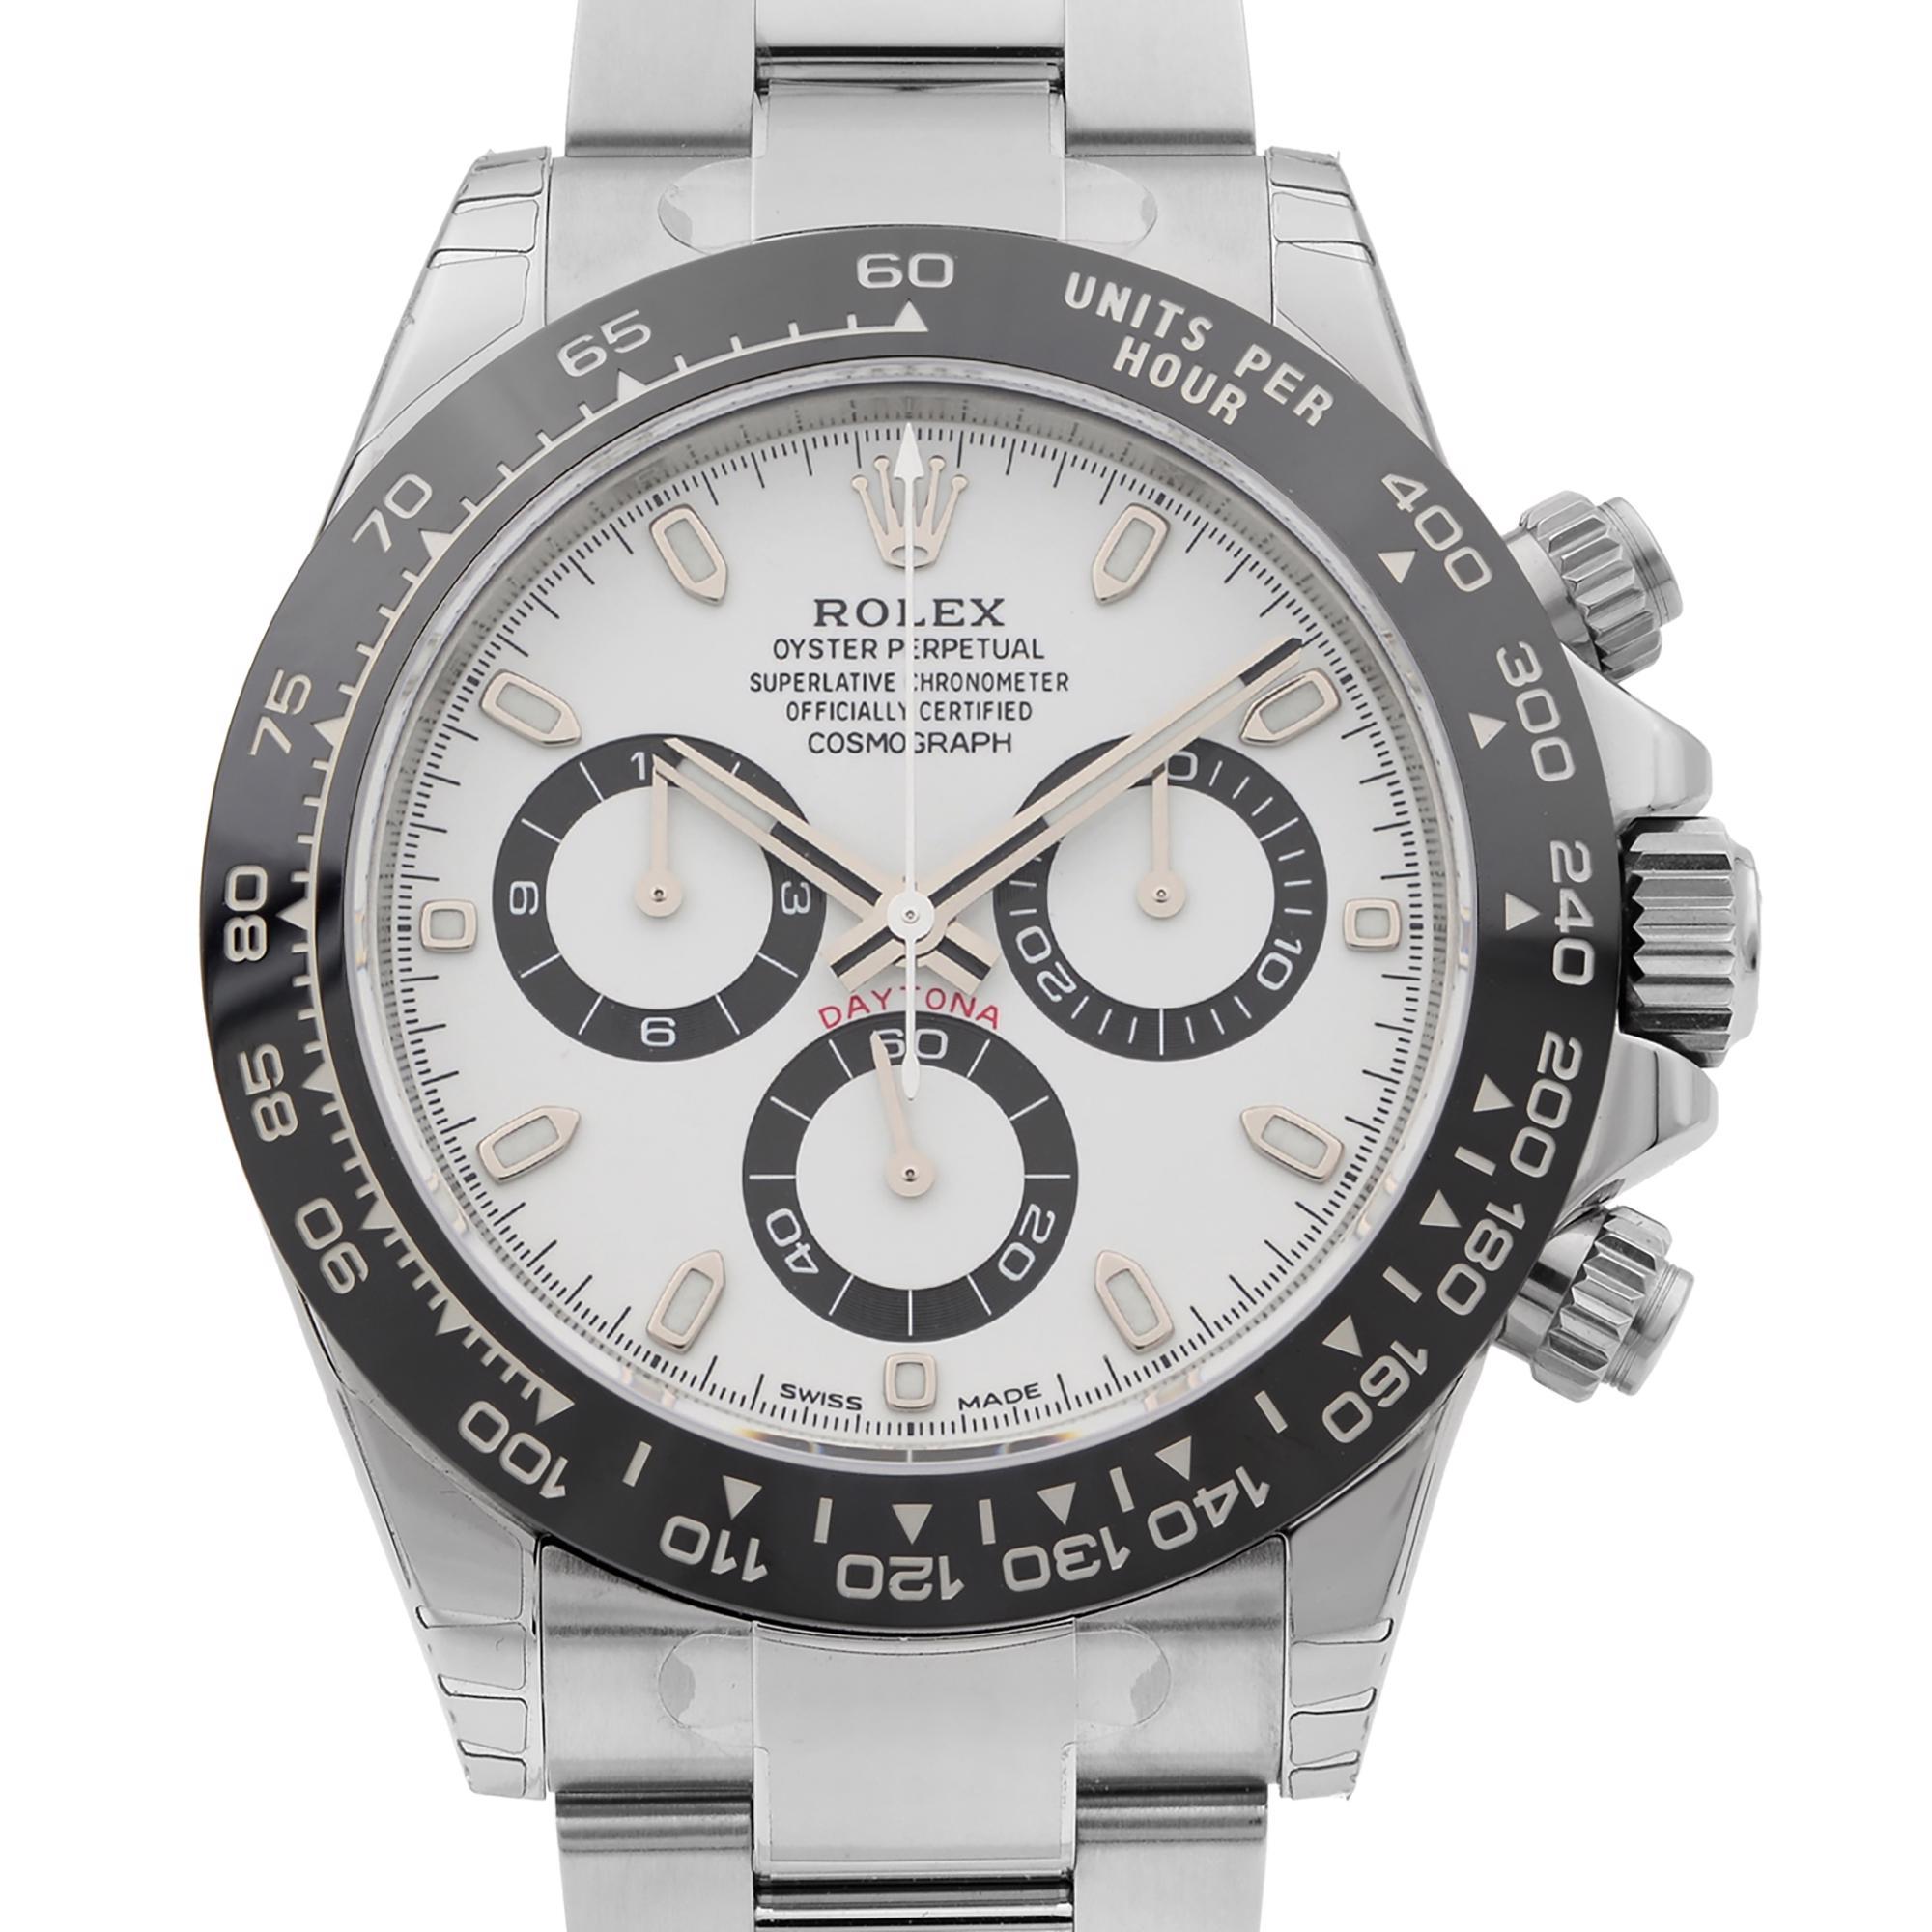 Unworn Fully Stickered 2021 Card Rolex Cosmograph Daytona Steel Ceramic Stick White Panda Dial Men Watch 116500LN. This Beautiful Men's Timepiece is Powered by an Mechanical (Automatic) Movement and Features: Stainless Steel Case with a Stainless